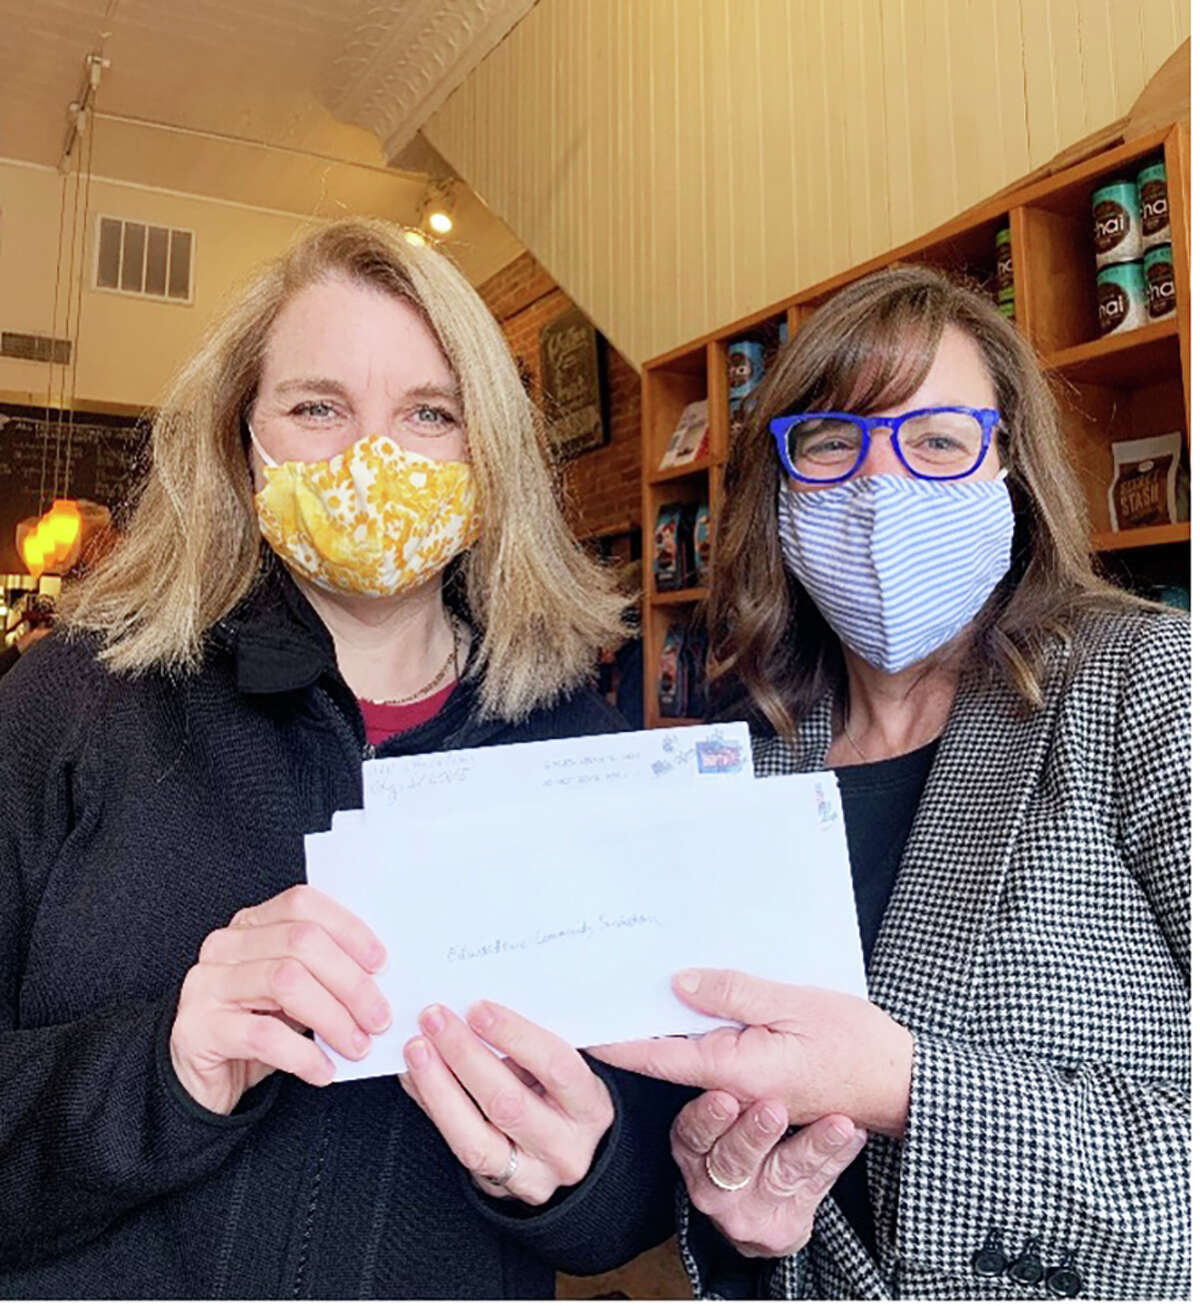 State Rep. Katie Stuart, D-Edwardsville, (right) presents a donation to Pam Farrar (left), executive director of the Edwardsville Community Foundation for tornado relief efforts at 222 Artisan Bakery on behalf of the Illinois House Moderate Caucus. On Monday, Stuart and other members of the House Labor and Commerce Committee virtually to discuss warehouse safety standards. 